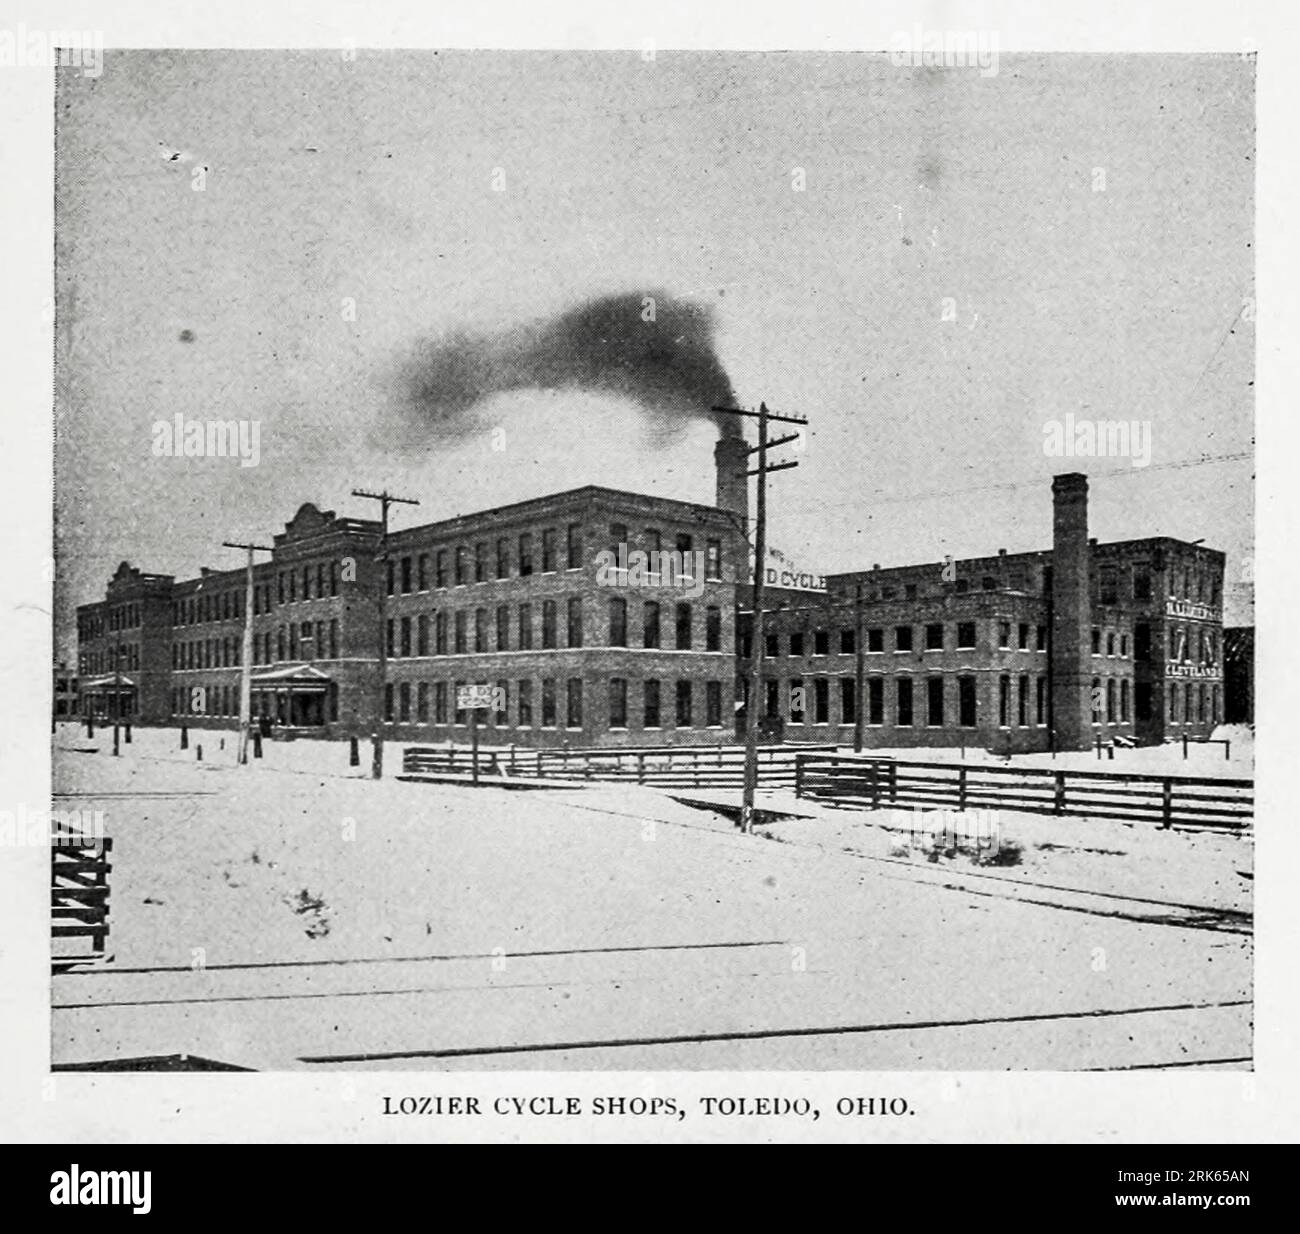 Lozier Cycle Shops, Toledo, Ohio from the Article MODERN MACHINE-SHOP ECONOMICS PRIME REQUISITES OF SHOP CONSTRUCTION By Horace L. Arnold from The Engineering Magazine DEVOTED TO INDUSTRIAL PROGRESS Volume XI October 1896 NEW YORK The Engineering Magazine Co Stock Photo